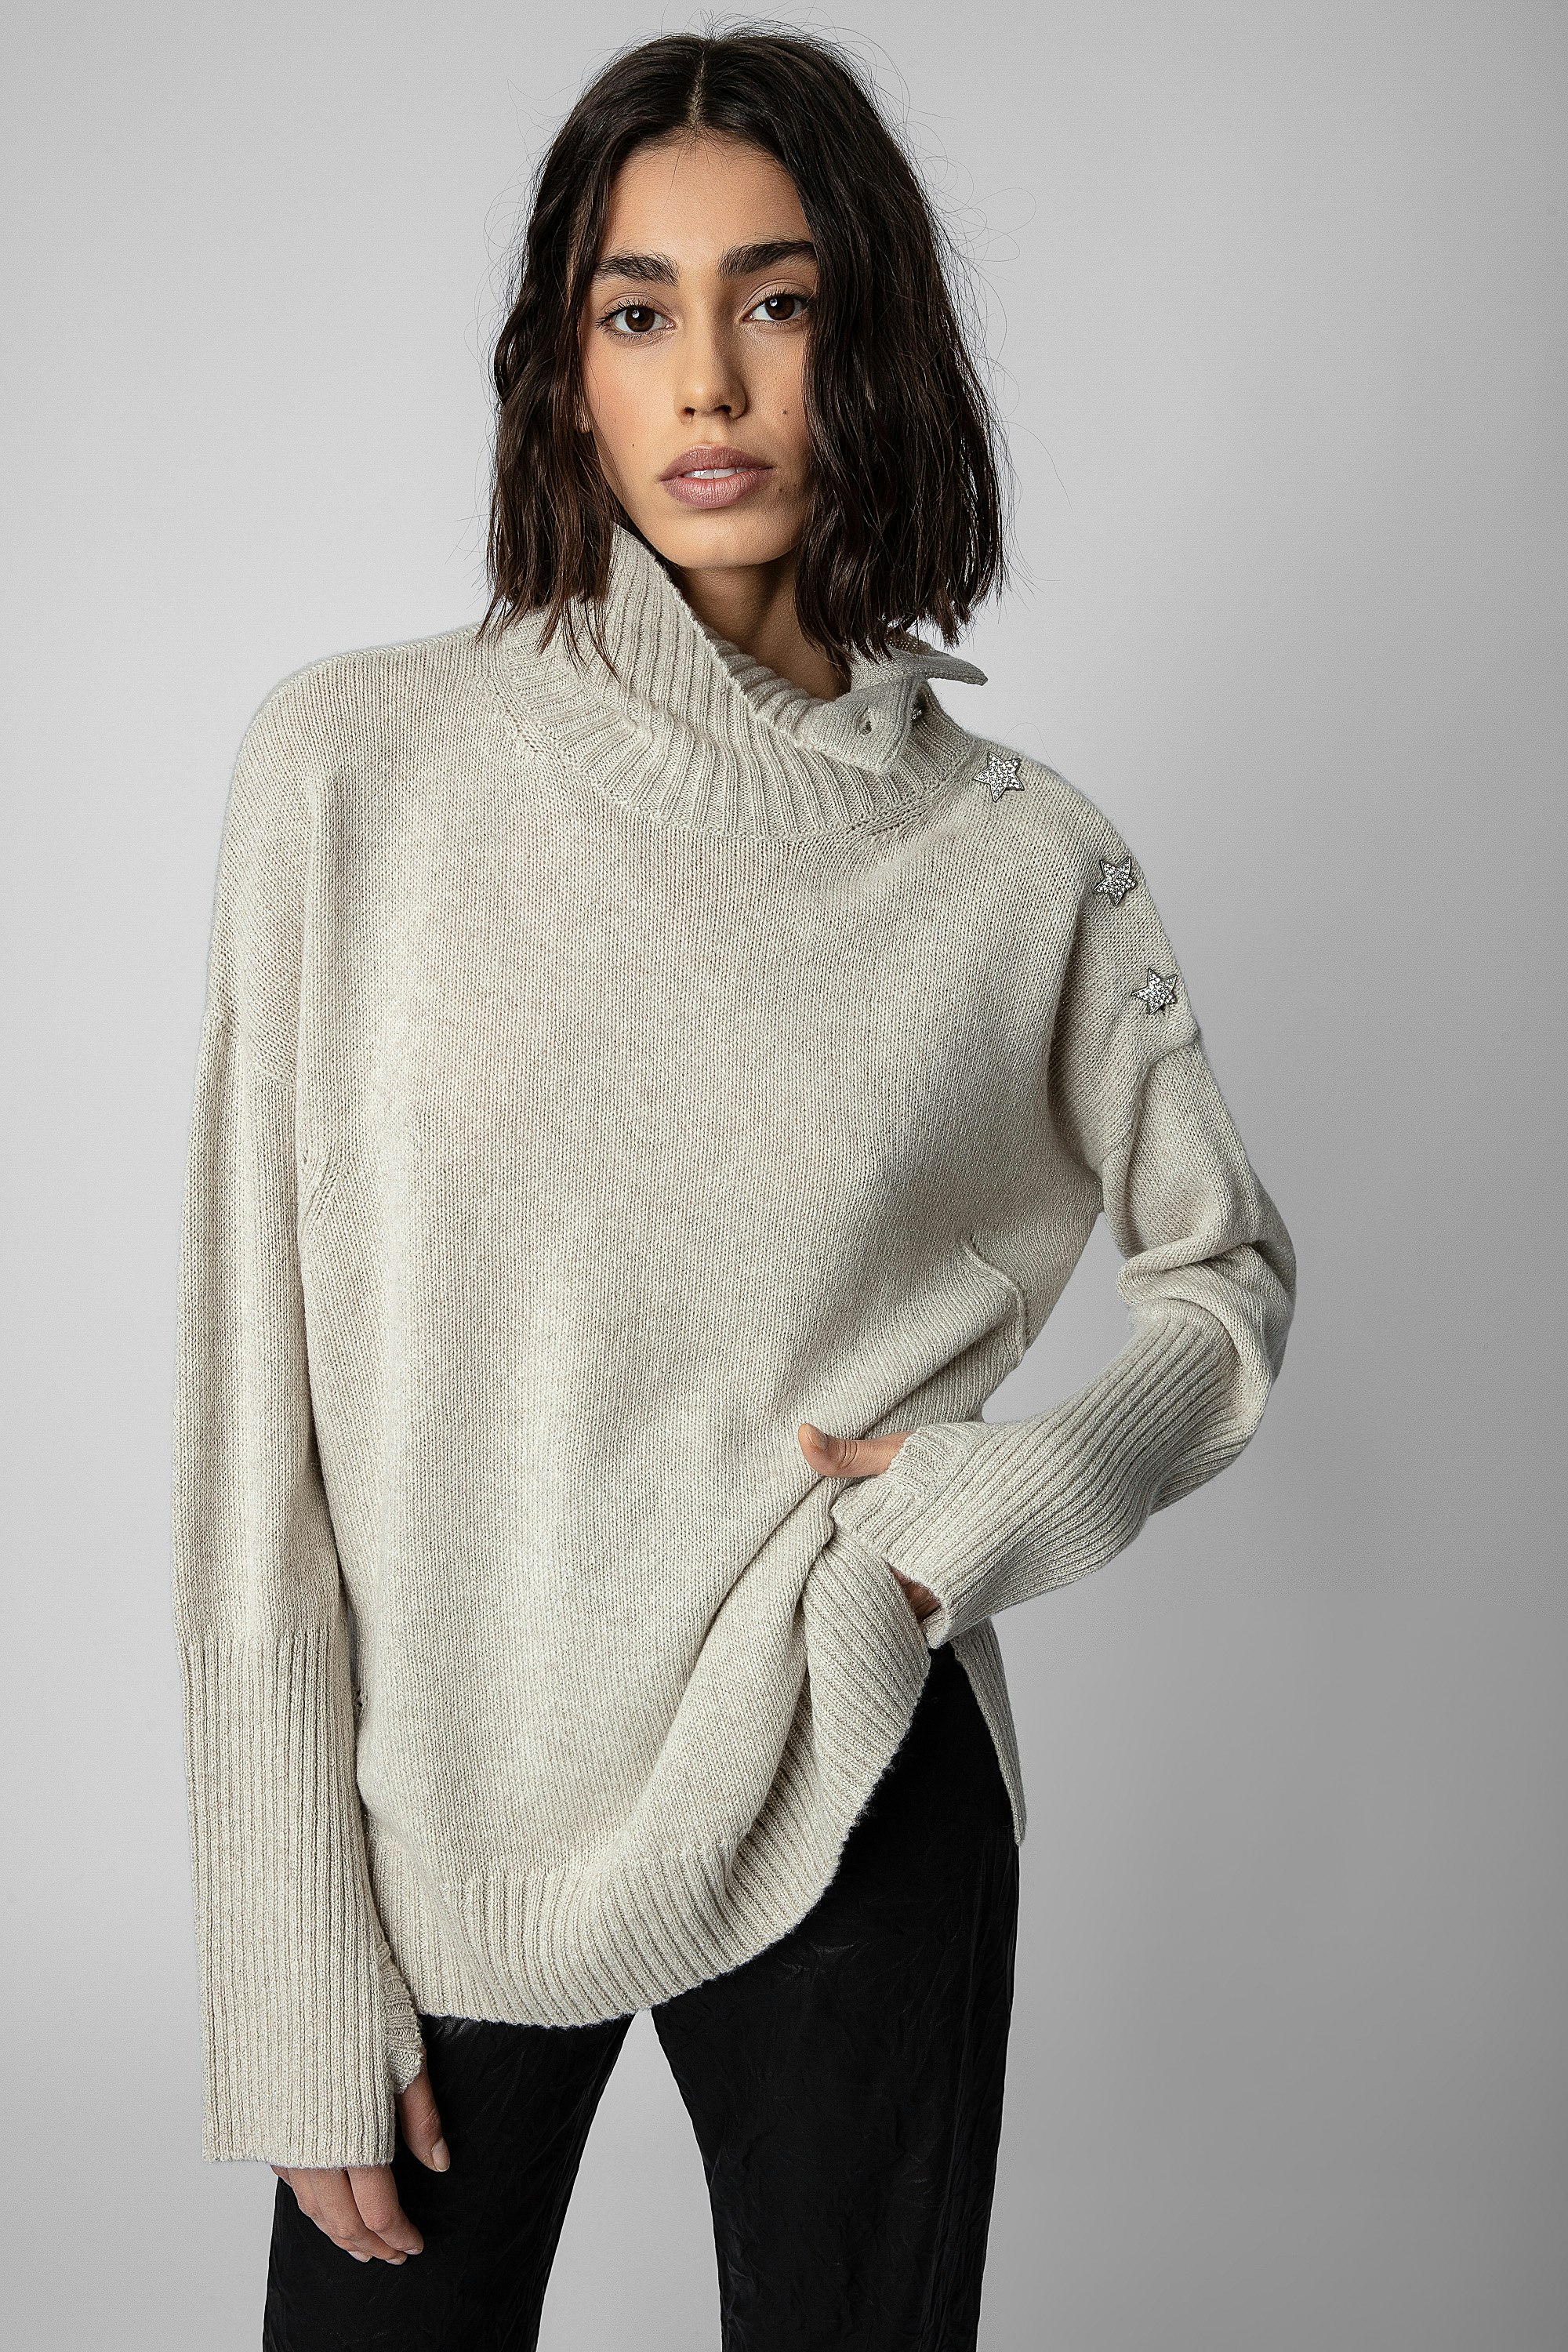 Alma Jewelled Jumper - Women’s cashmere jumper with high collar and jewelled buttons.